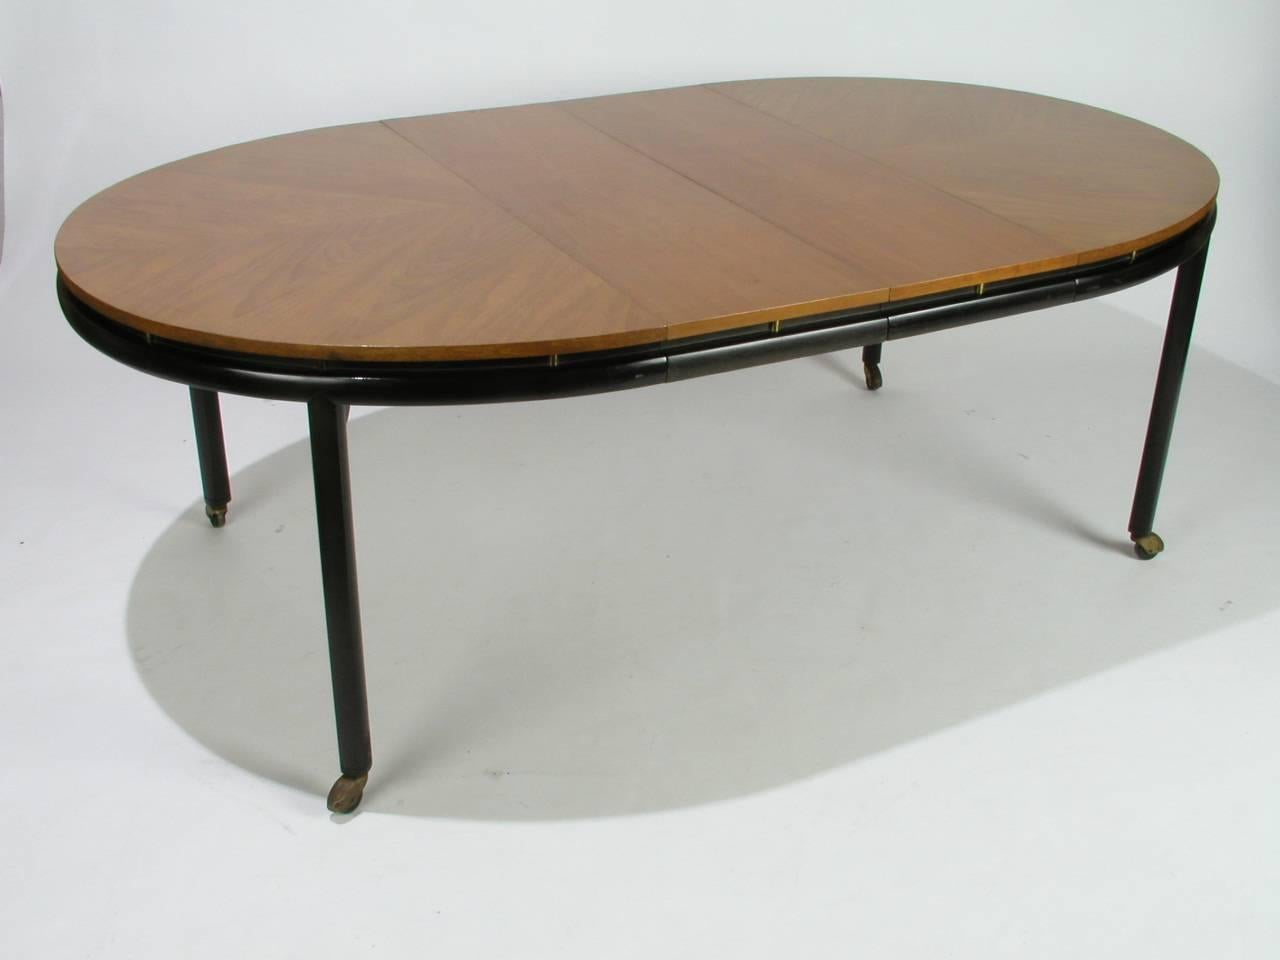 American Baker New World Collection Oval Dining Table by Winsor White & Michael Taylor